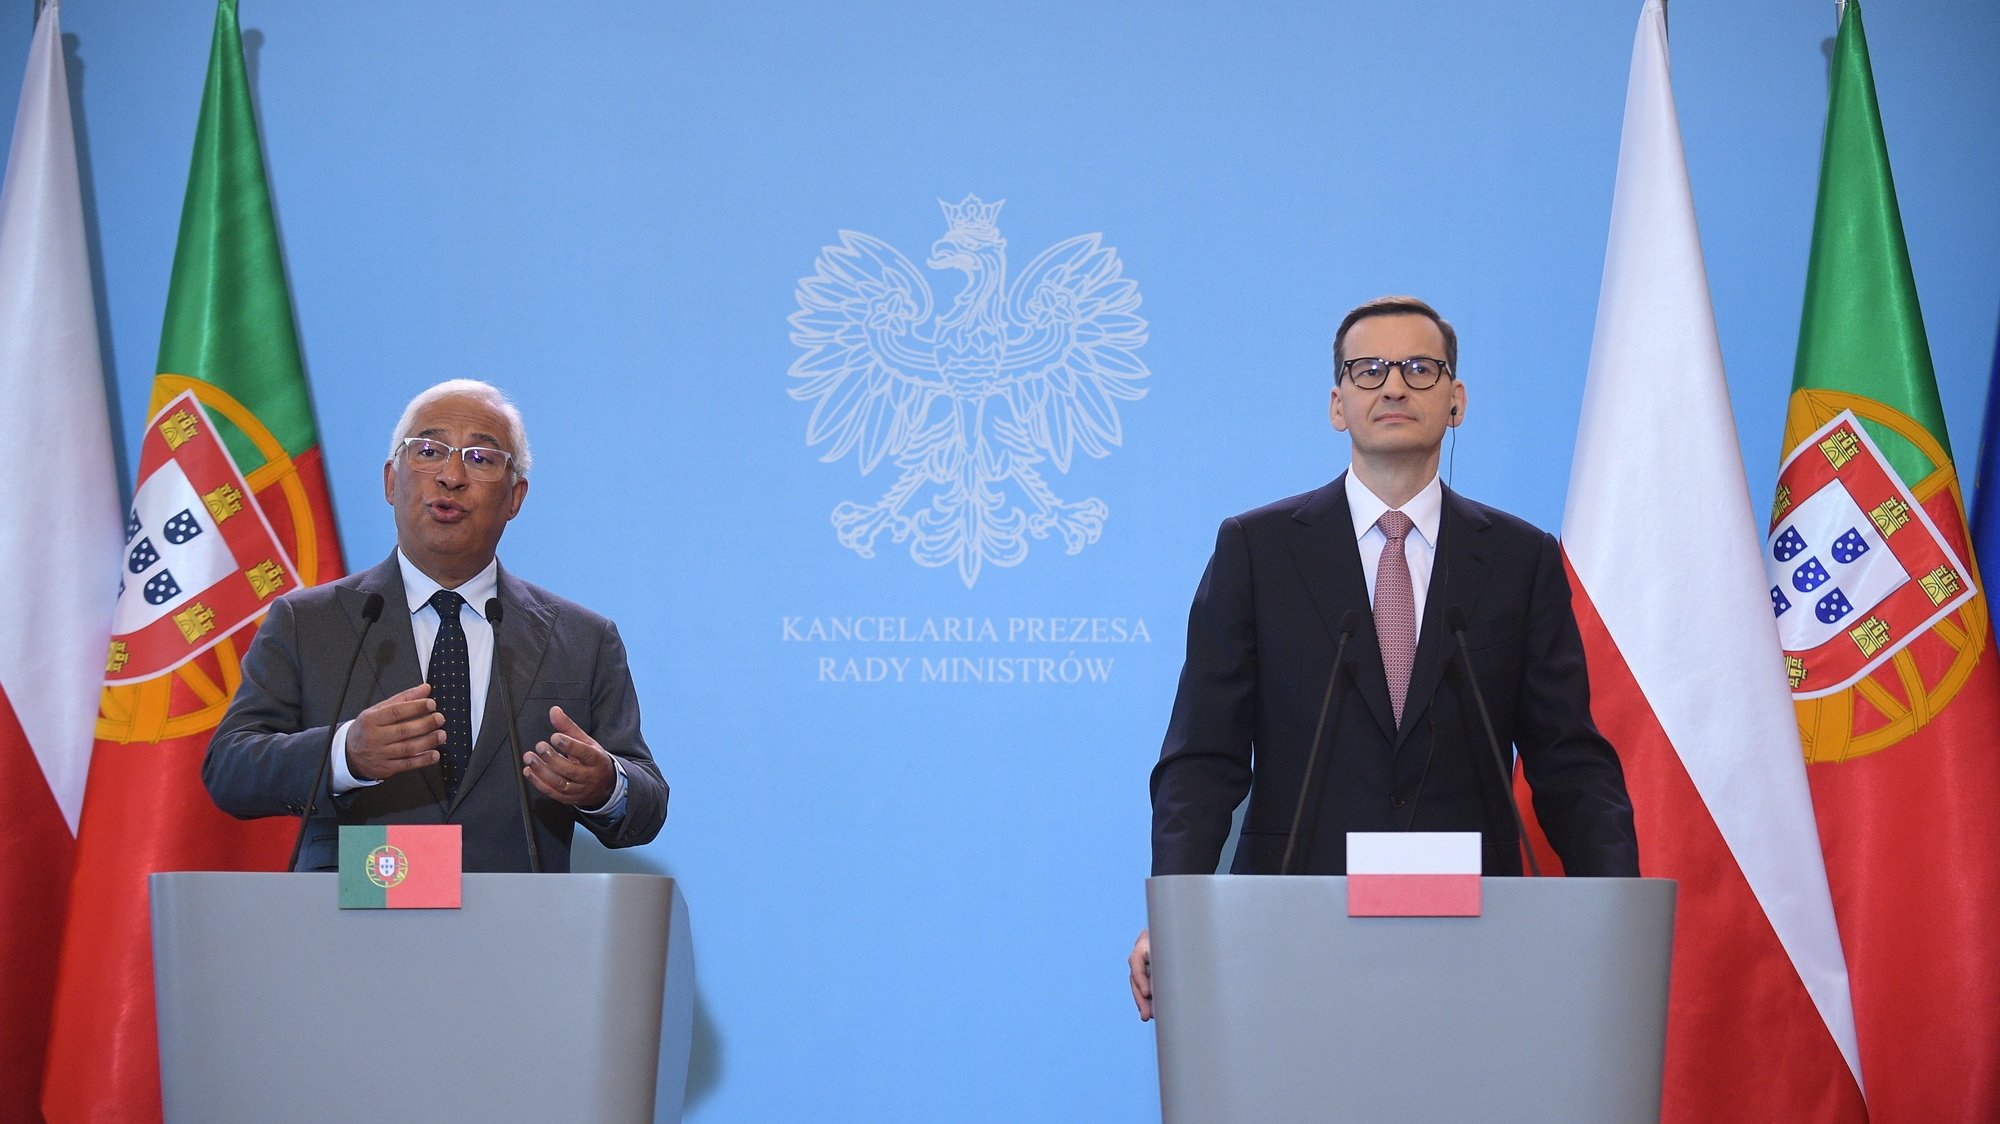 epa09959689 Polish Prime Minister Mateusz Morawiecki (R) and Portuguese Prime Minister Antonio Costa (L) attend a joint press conference following their meeting at the Chancellery of the Prime Minister in Warsaw, Poland, 20 May 2022.  EPA/Marcin Obara POLAND OUT